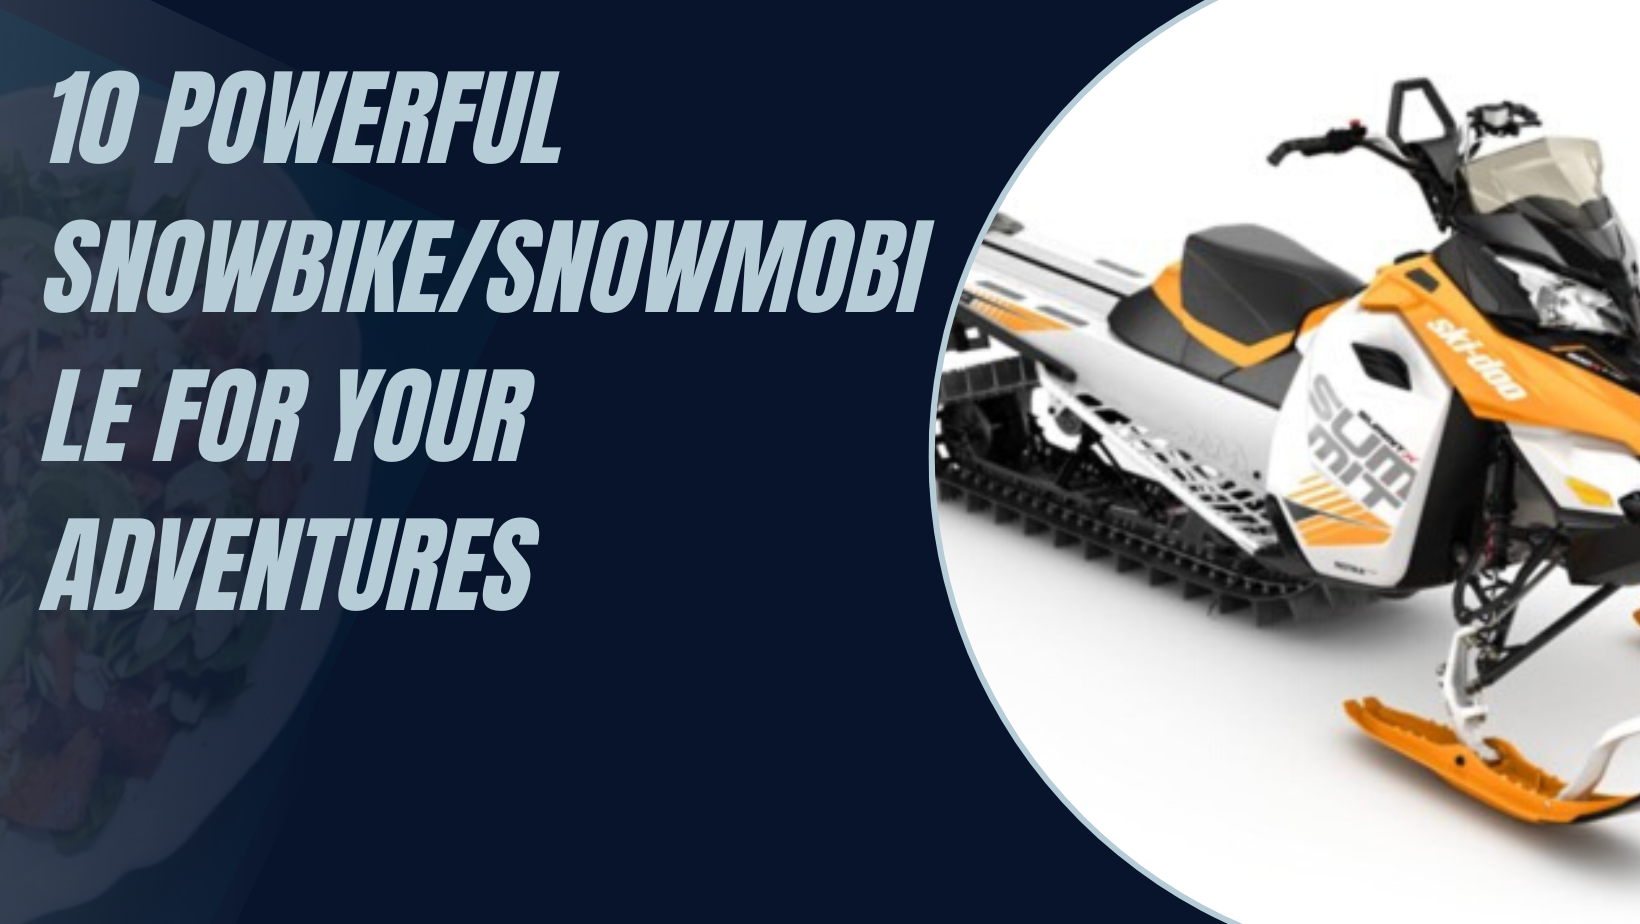 10 Powerful Snowbike/Snowmobile For Your Adventures